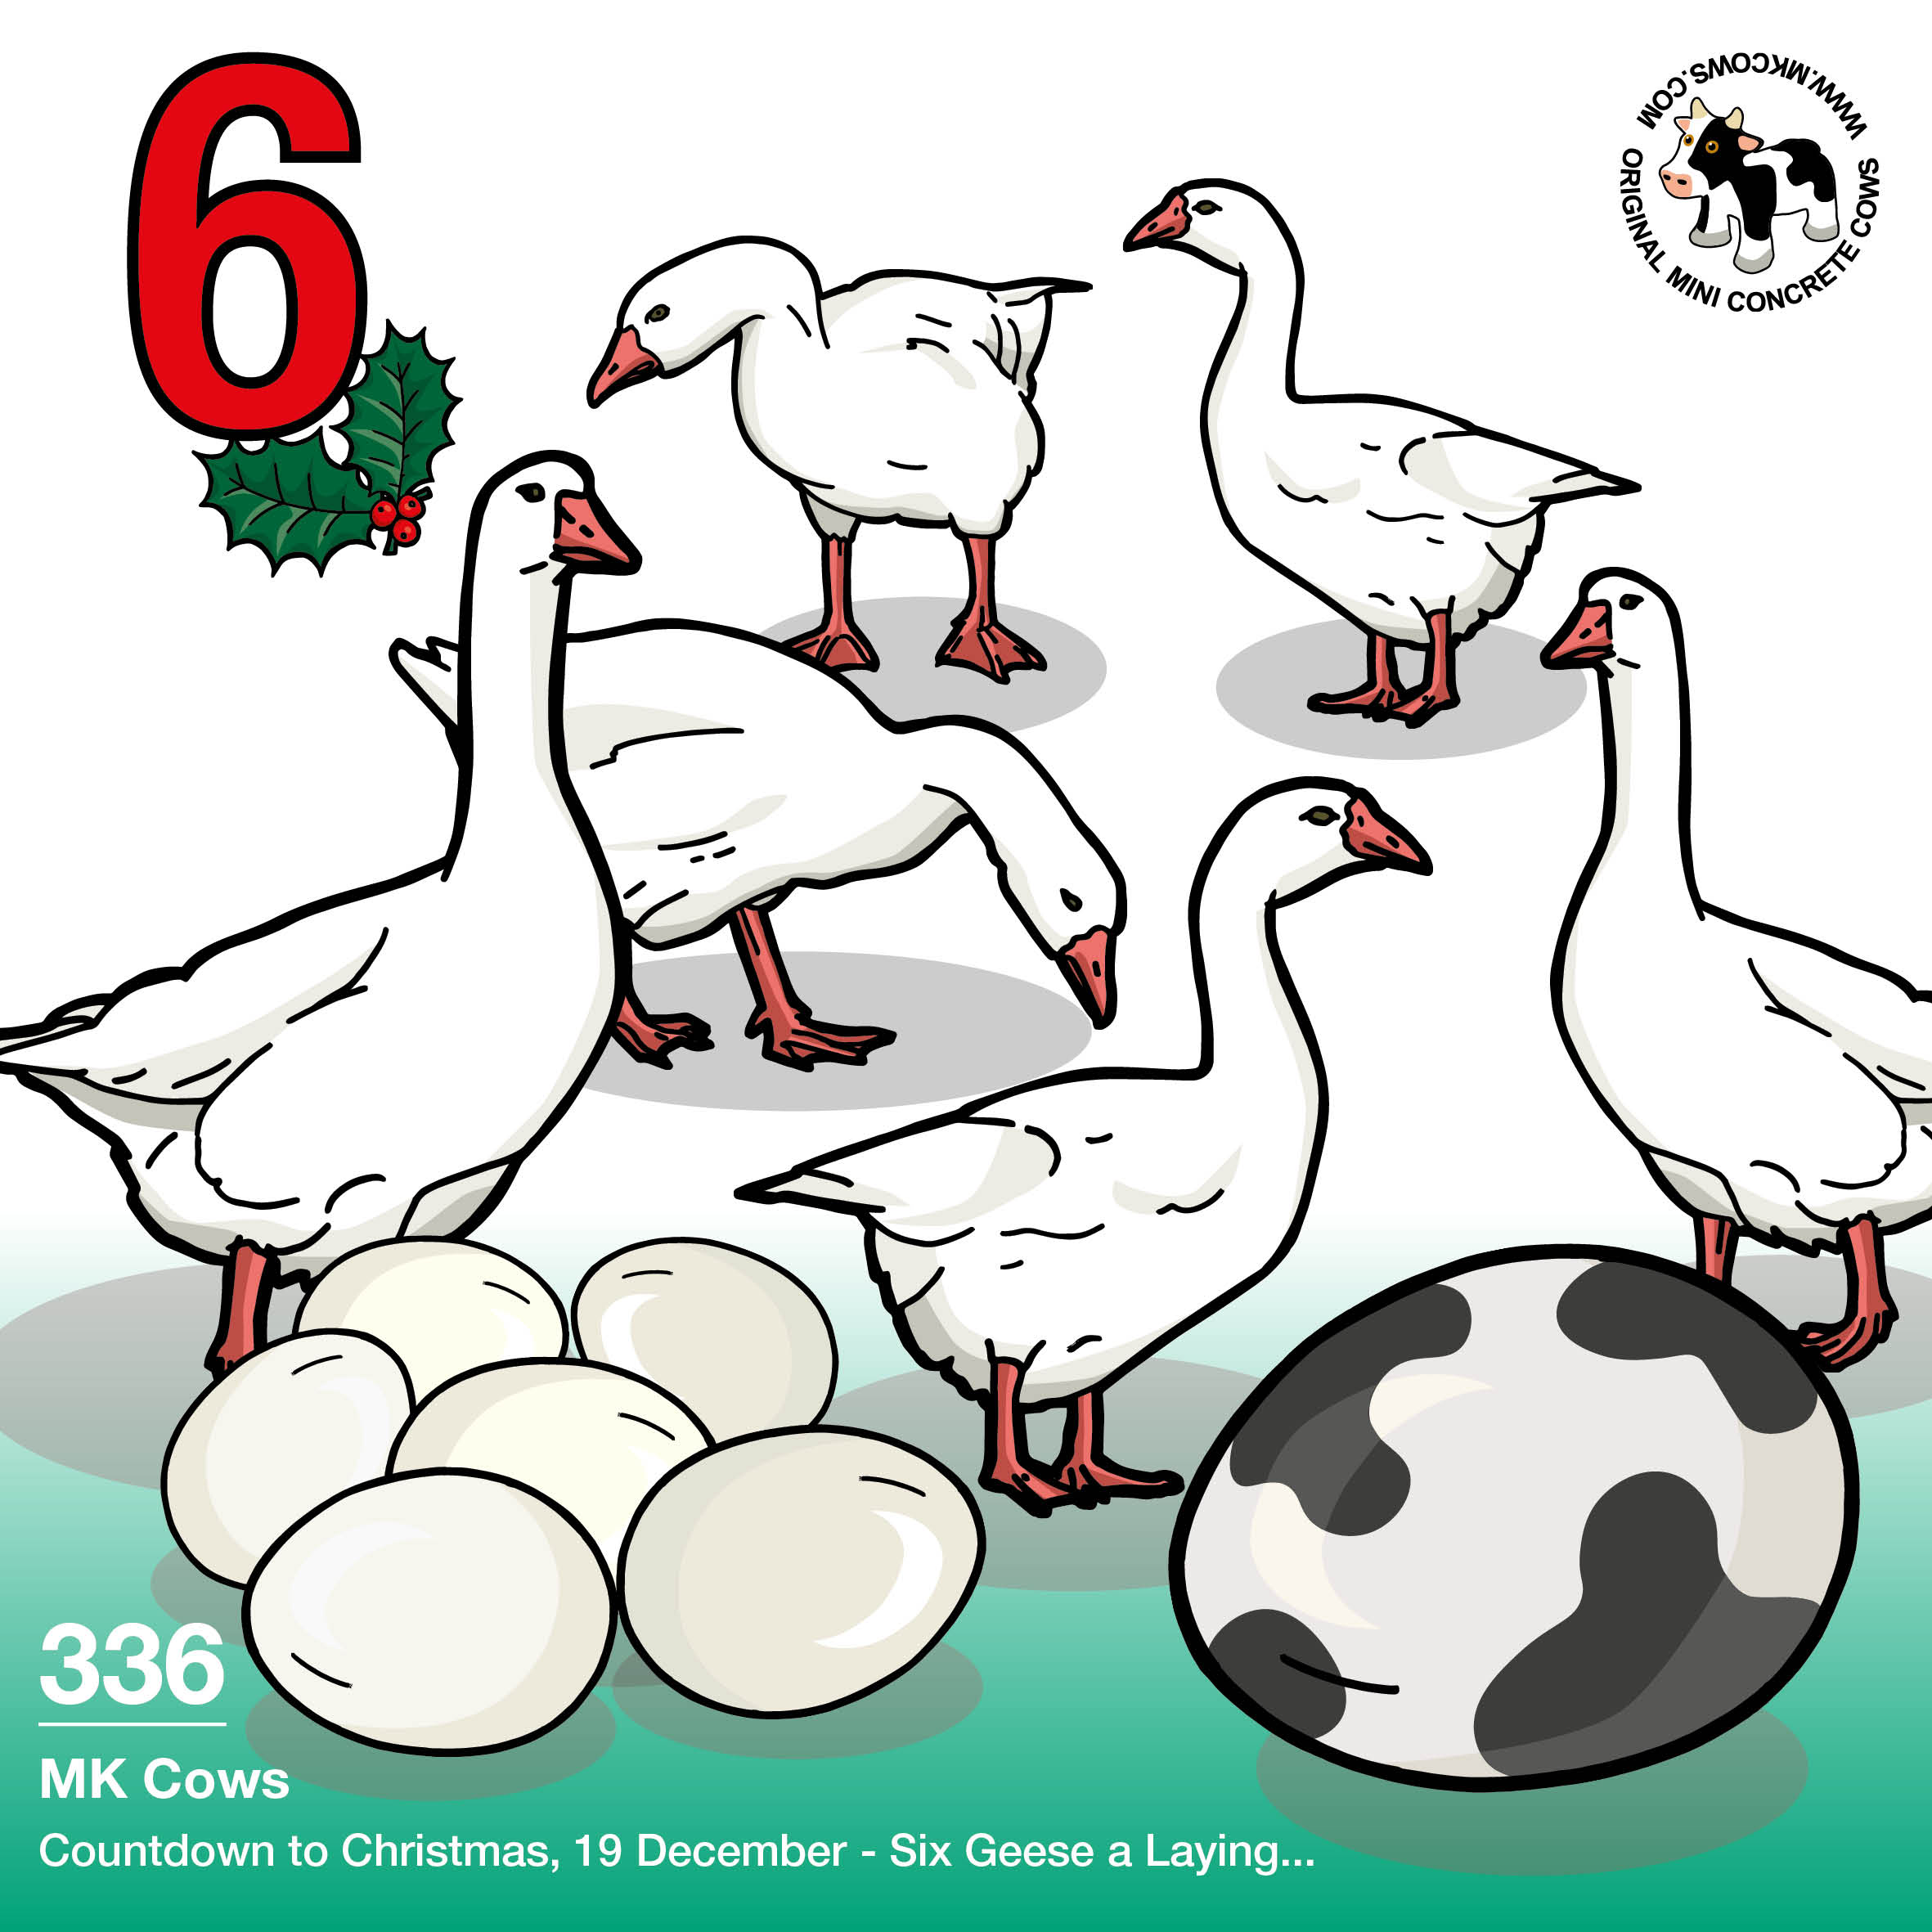 On the sixth day of Christmas my moo cow gave to me... six geese a laying (with an egg shape Mini Concrete Cow!)